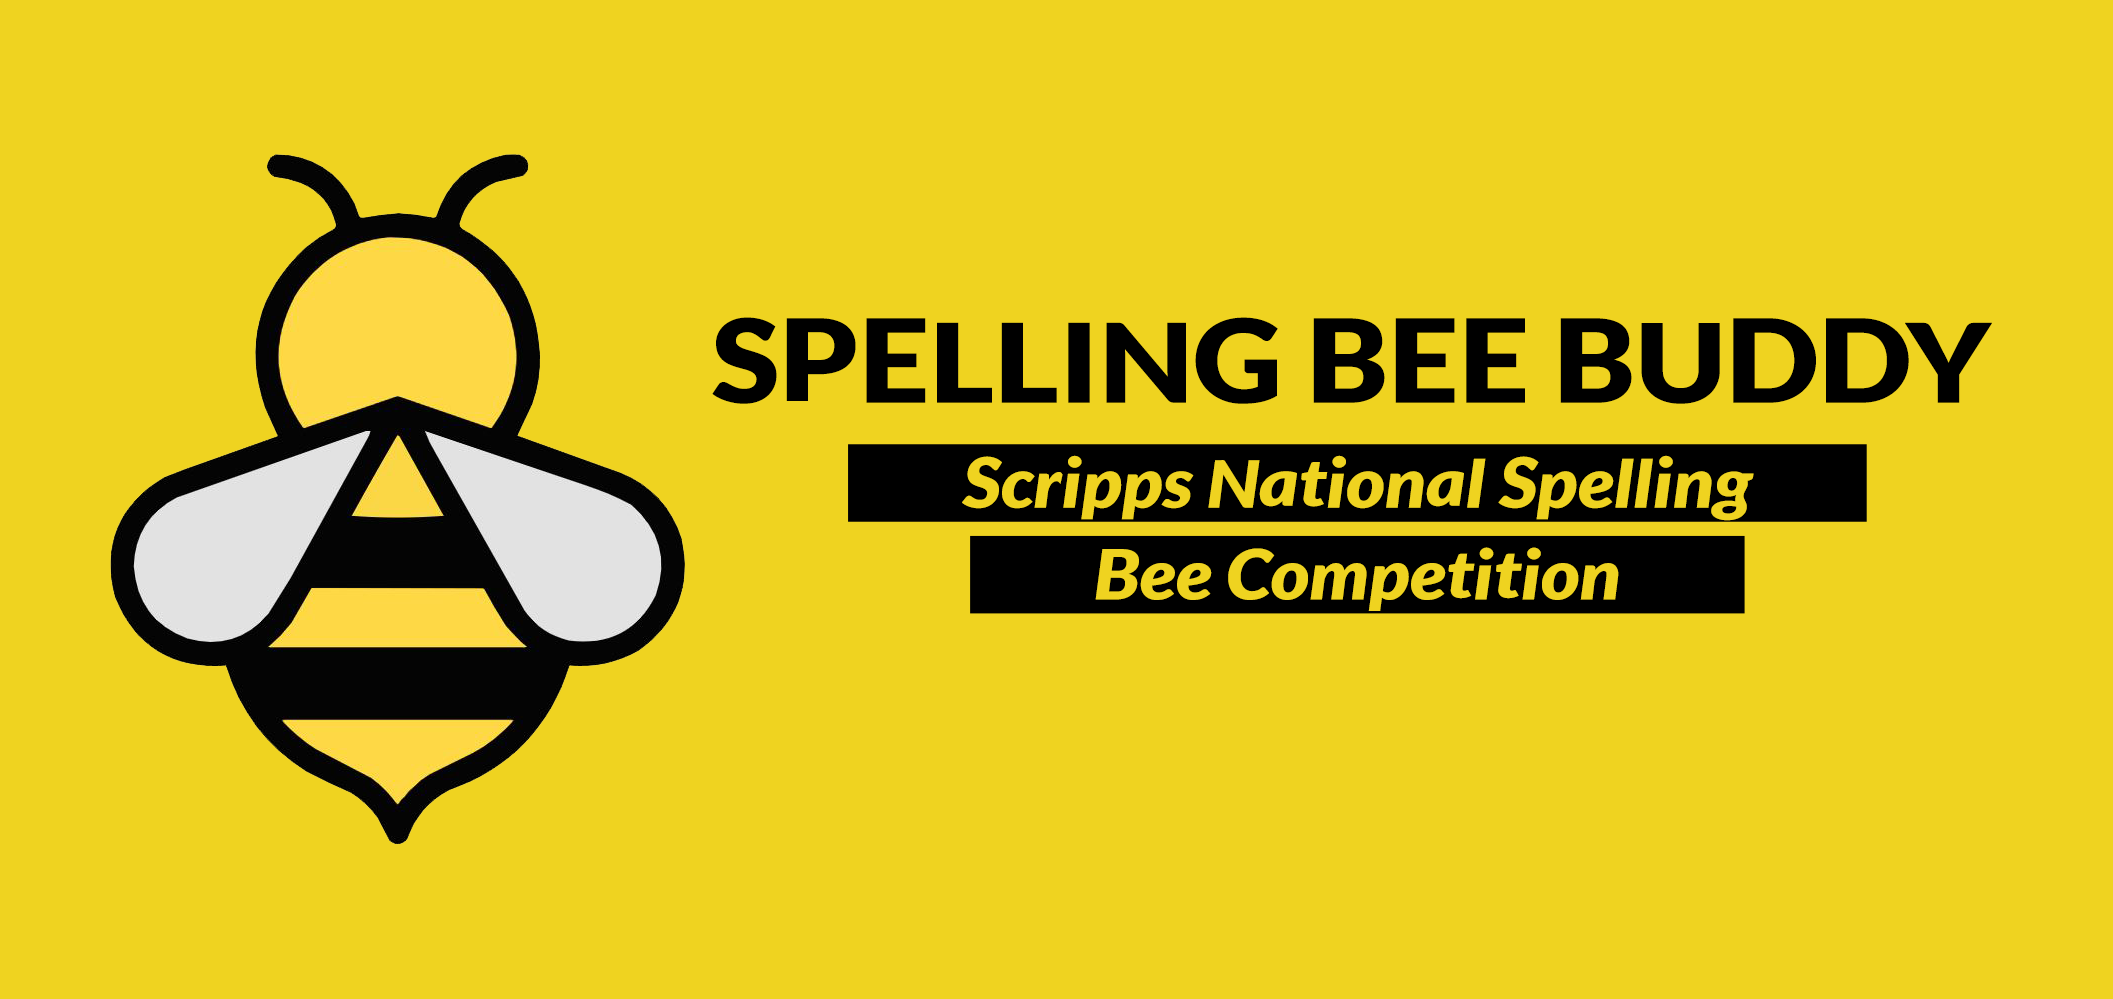 Scripps National Spelling Bee Competition